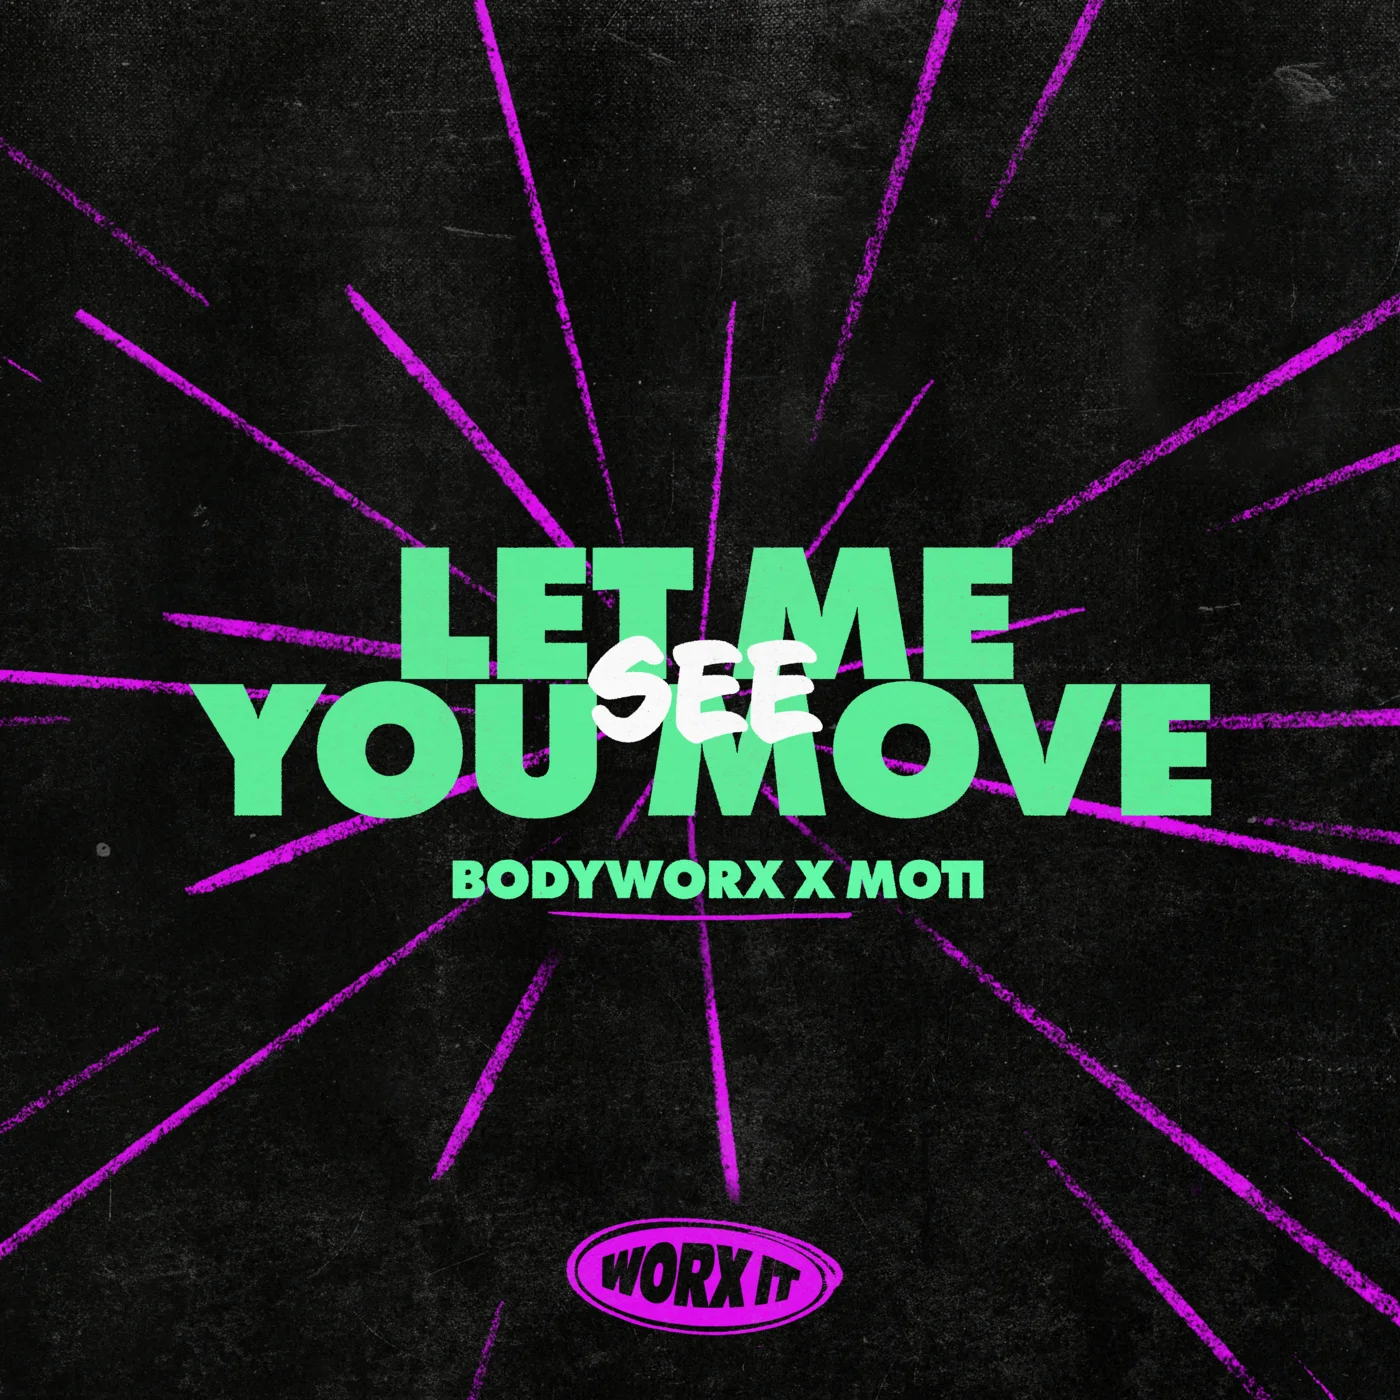 Bodyworx Moti - Let Me See You Move (Extended Mix)